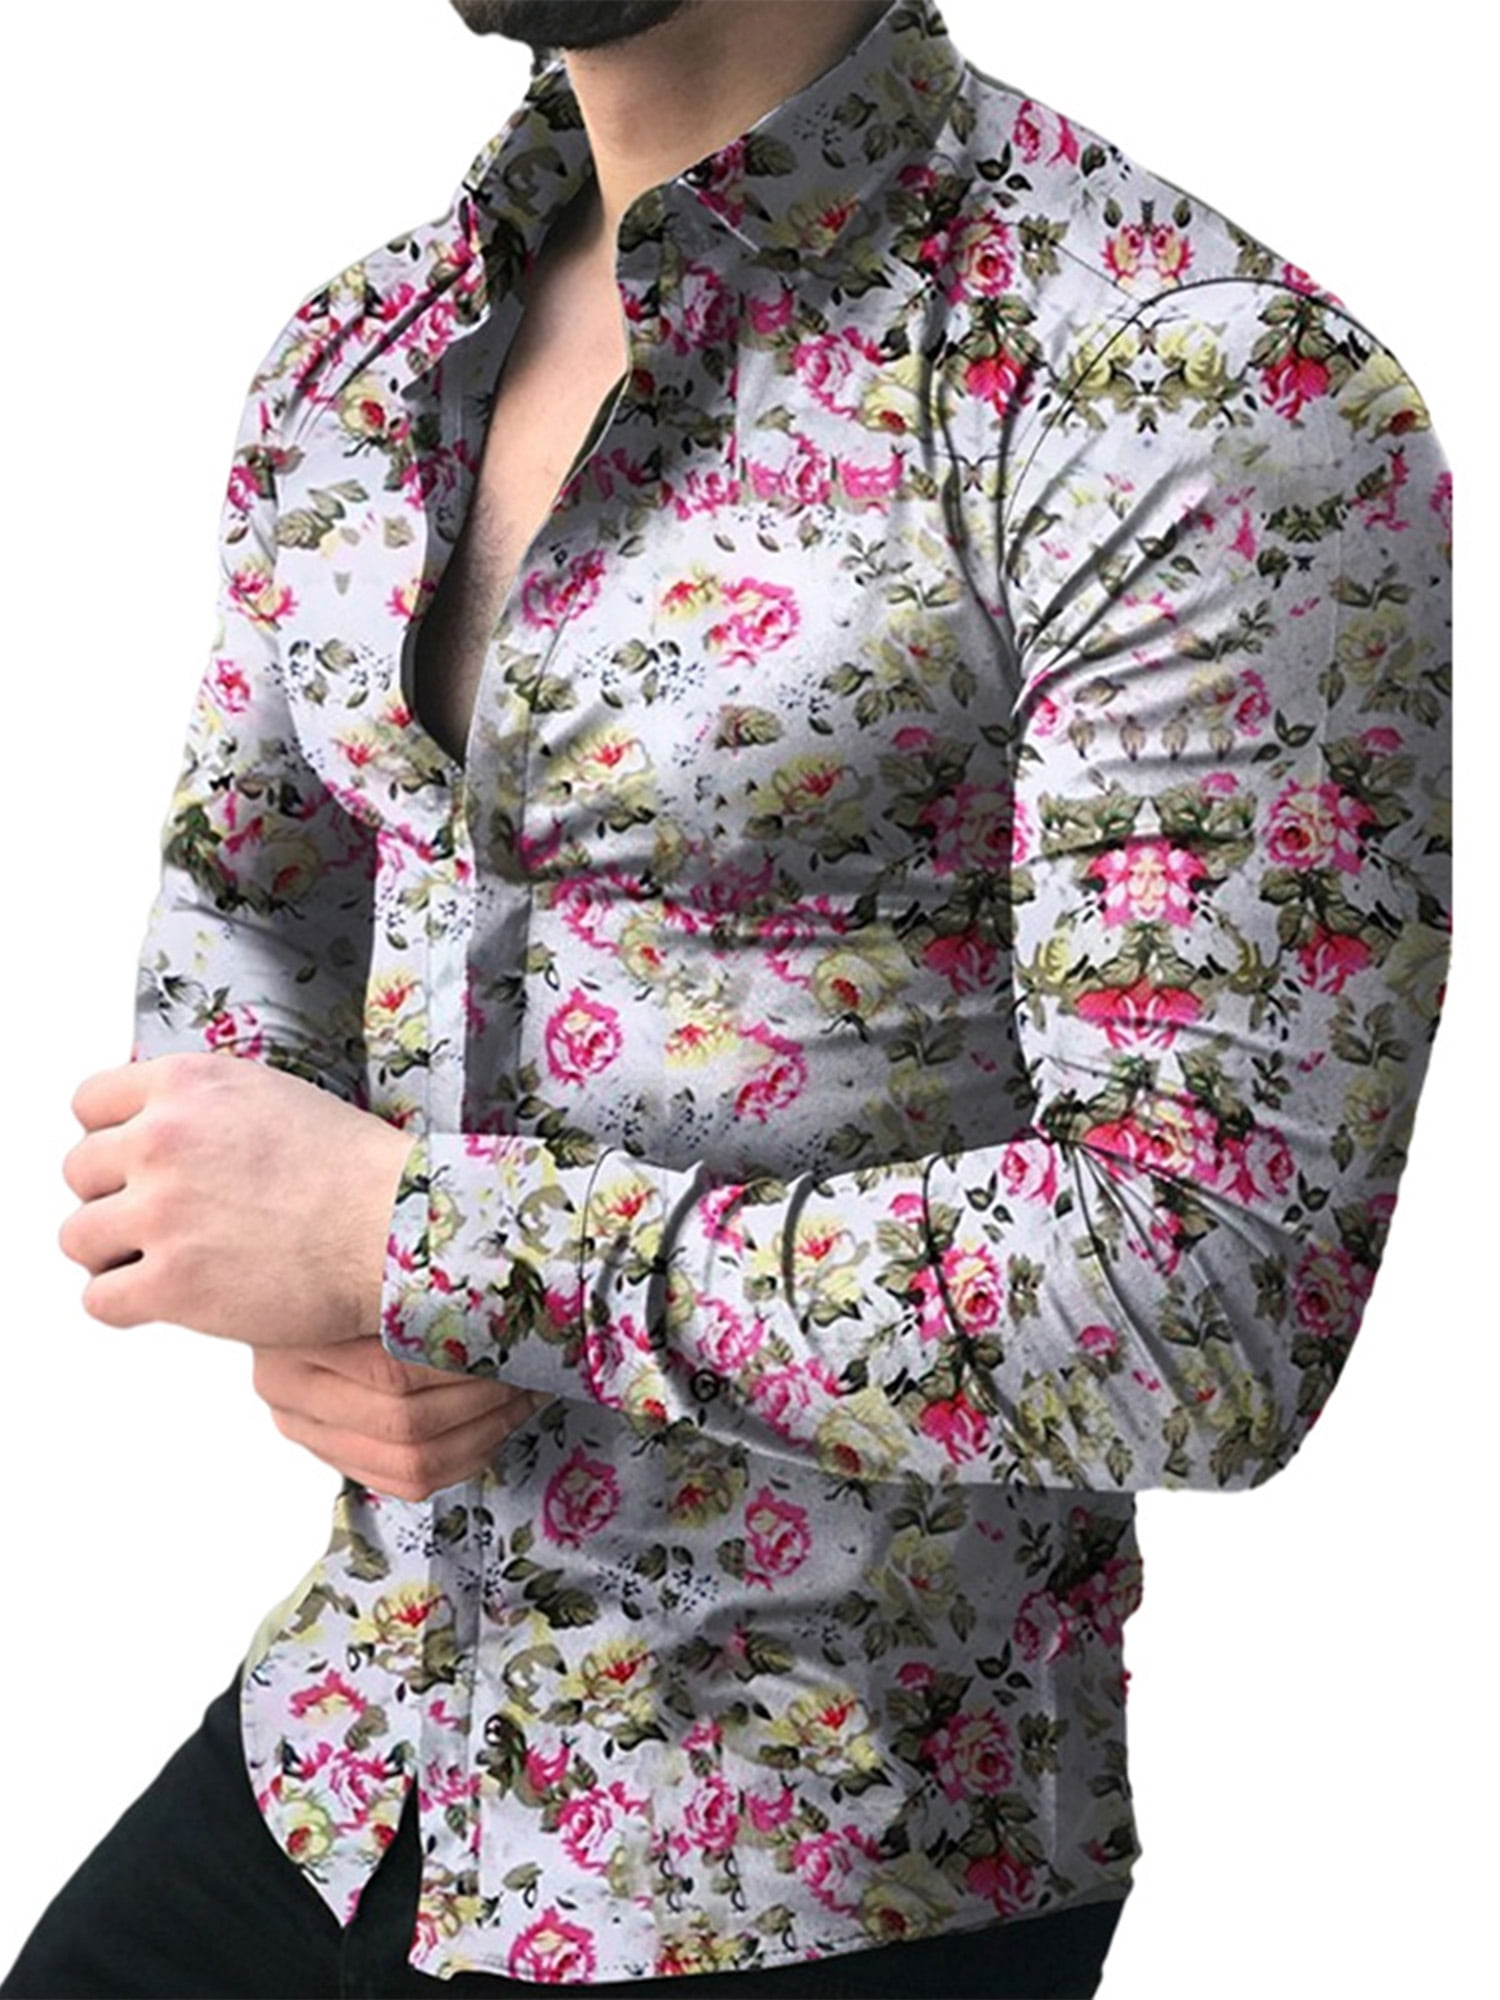 Men's Floral Casual Shirt Flower Printed Long Sleeve Party Holiday Dress Shirts 